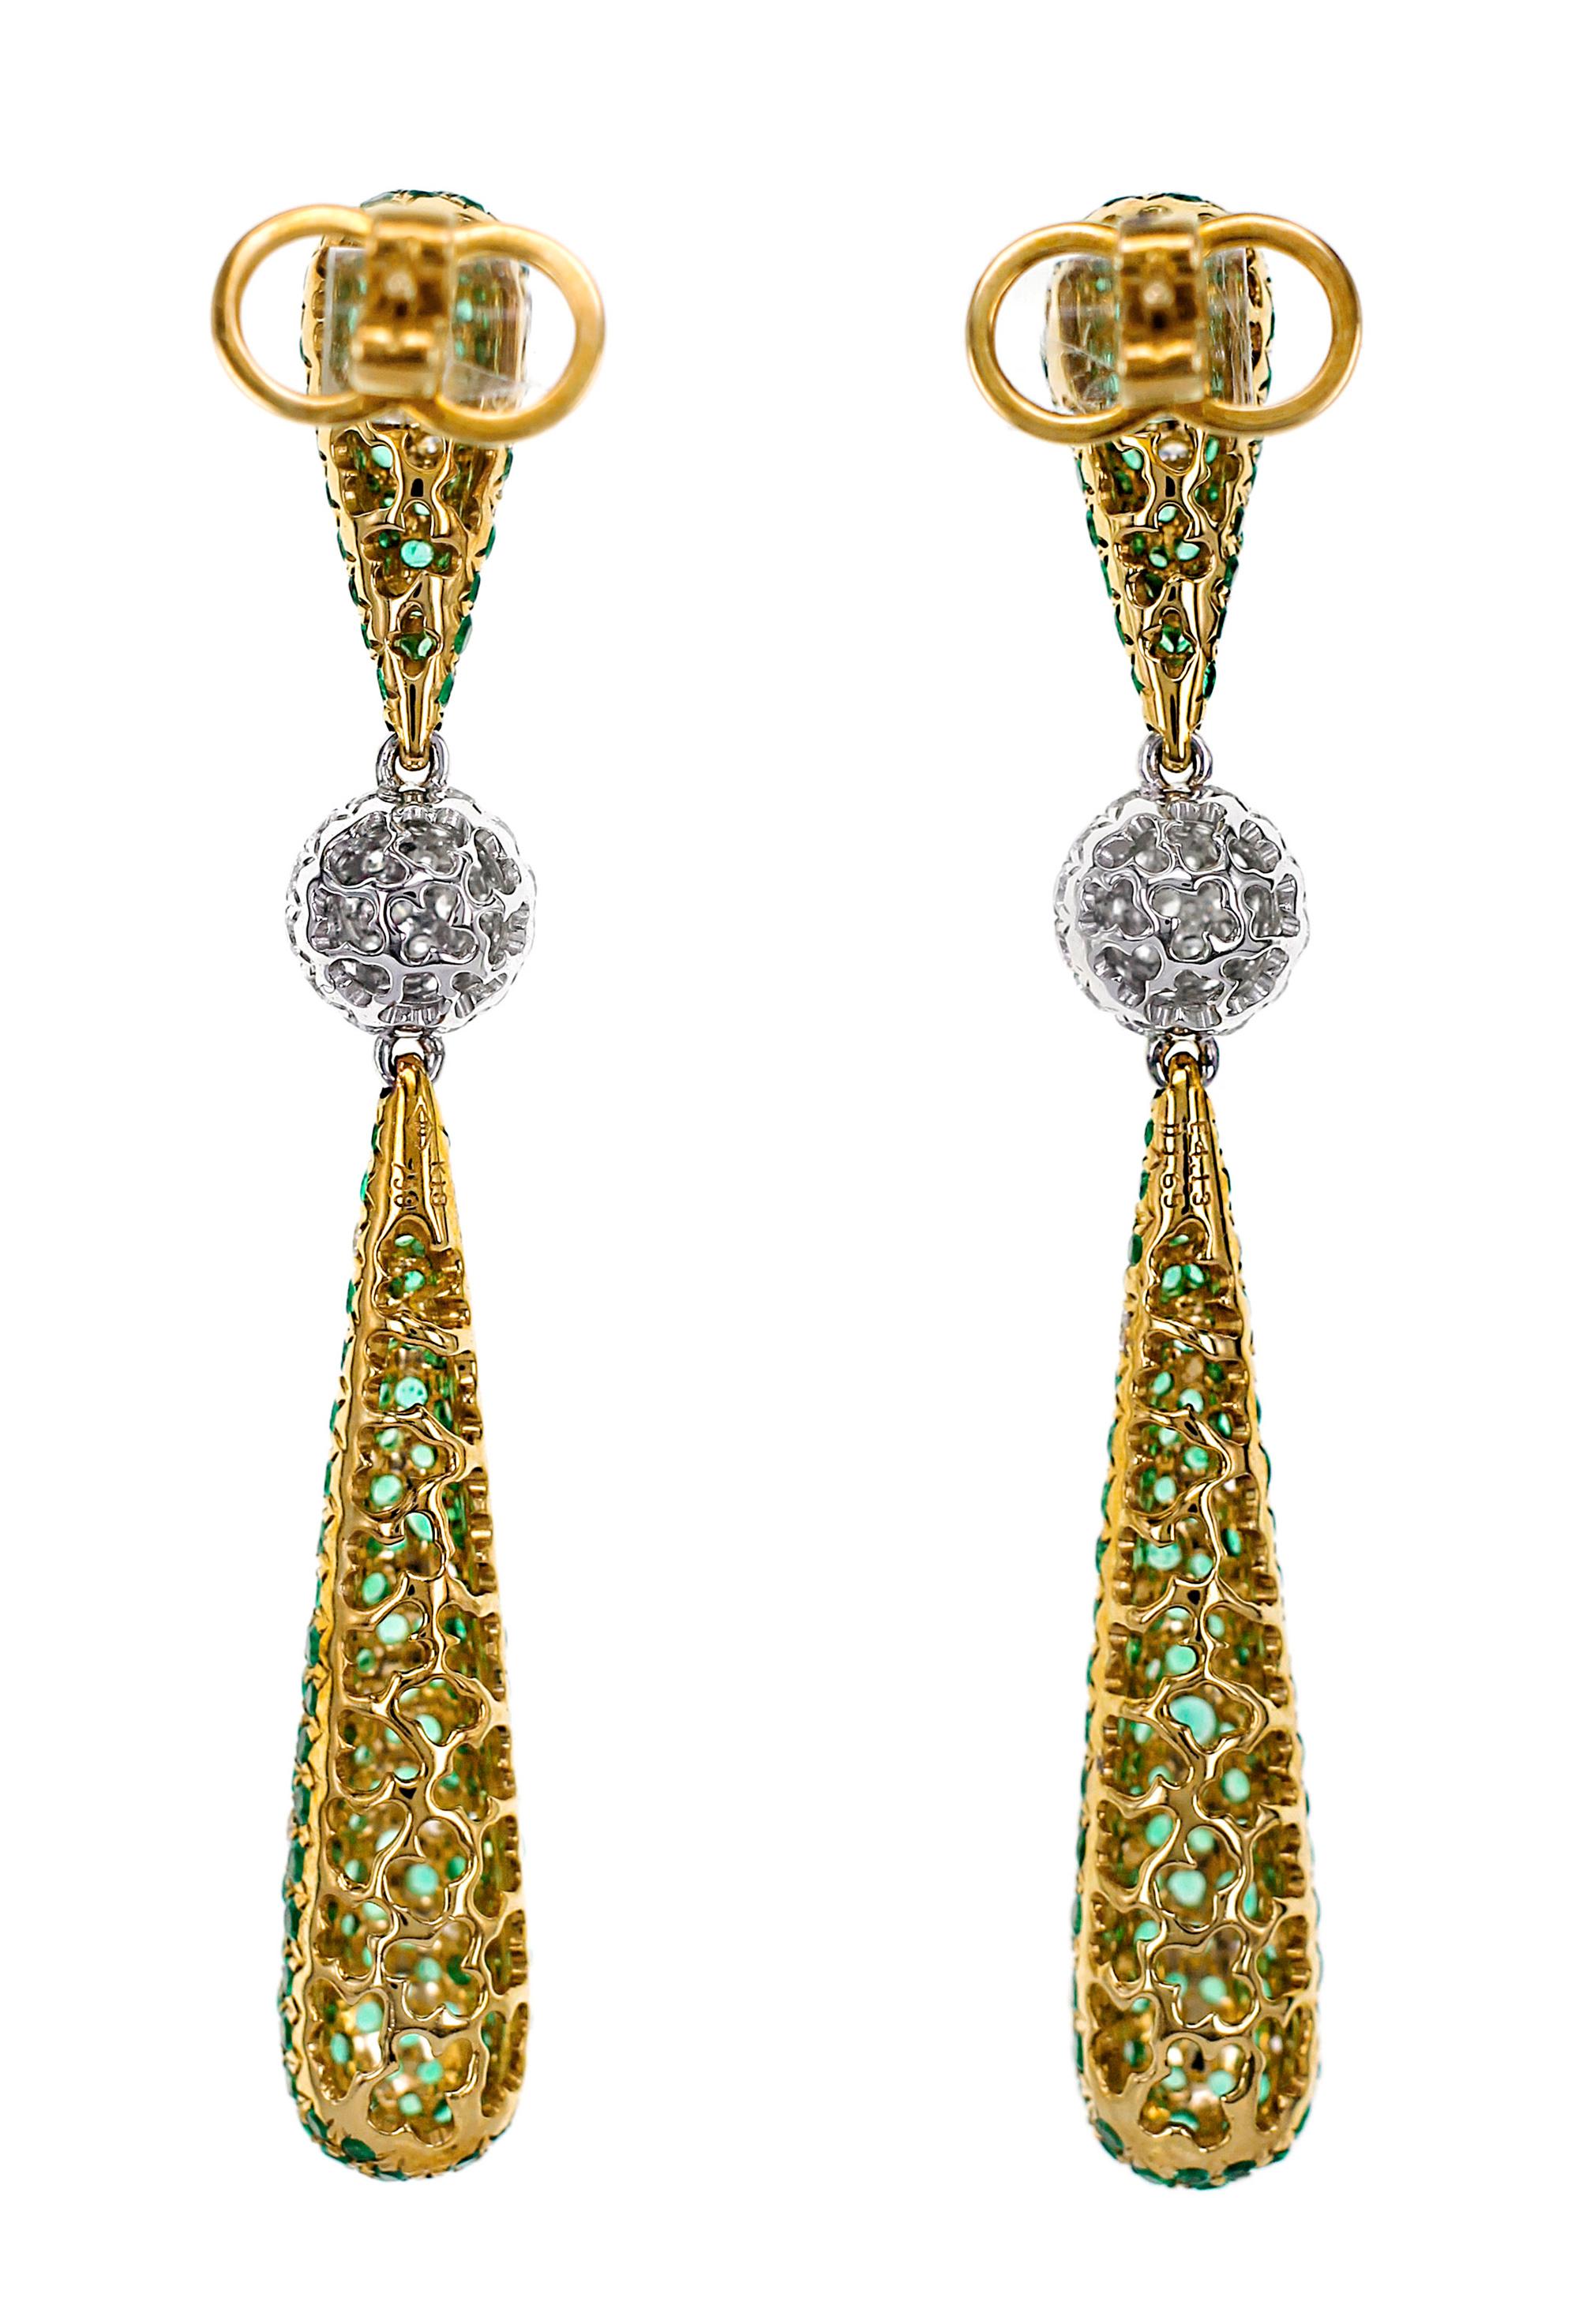 Anglo-Indian 4.13 Carat Emerald and Diamond Dangle Cocktail Earring For Sale